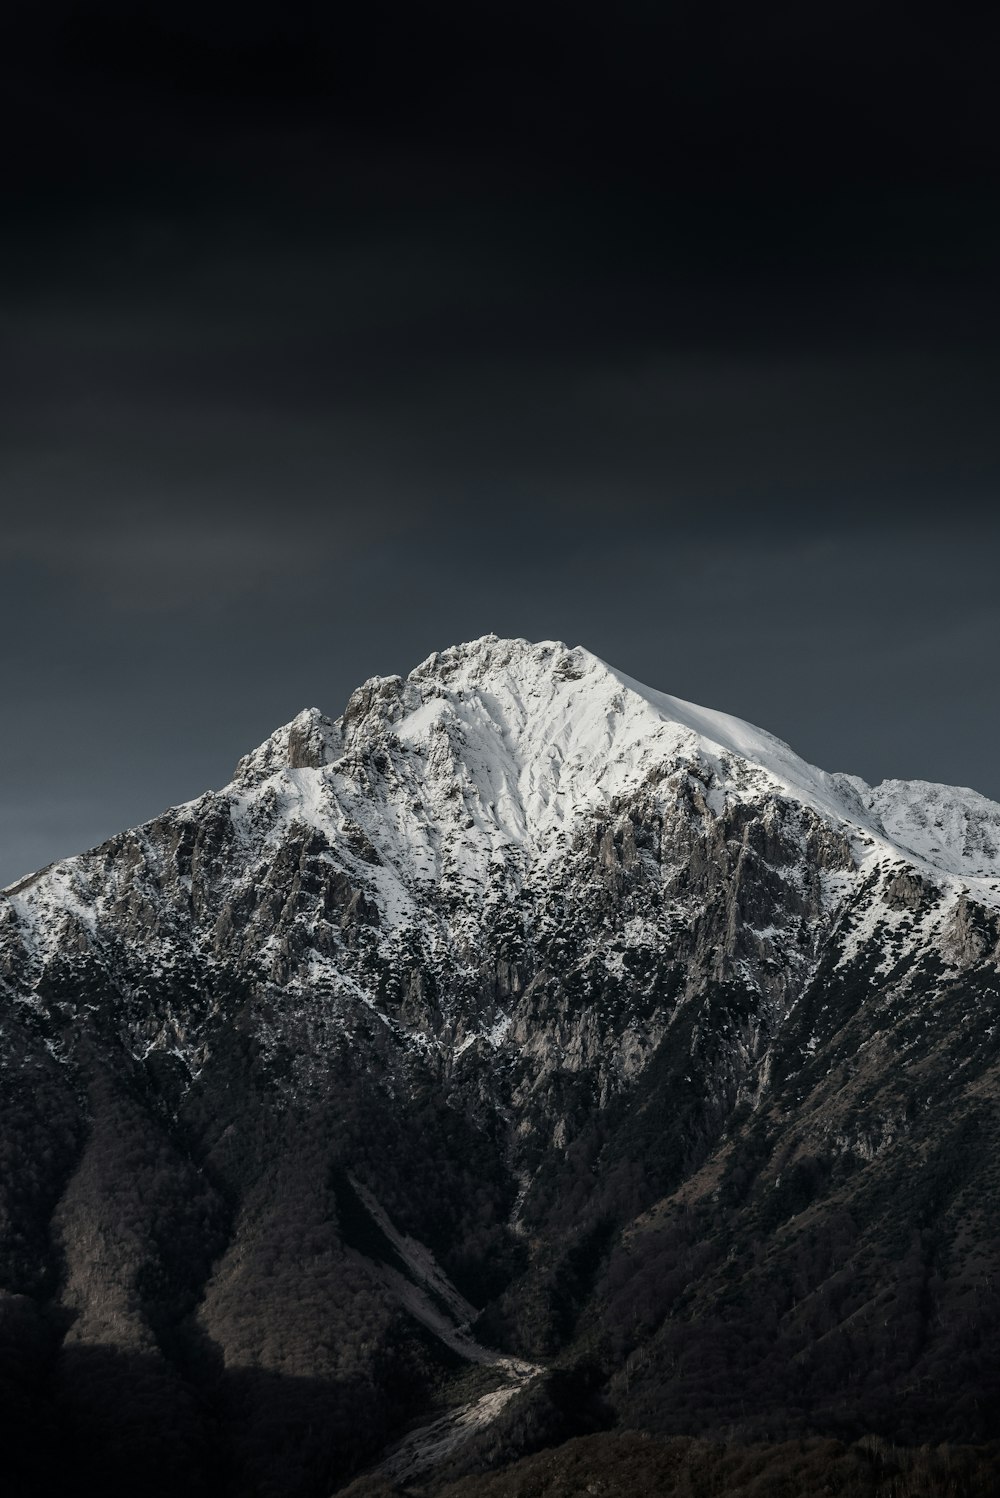 snow capped mountain under cloudy sky